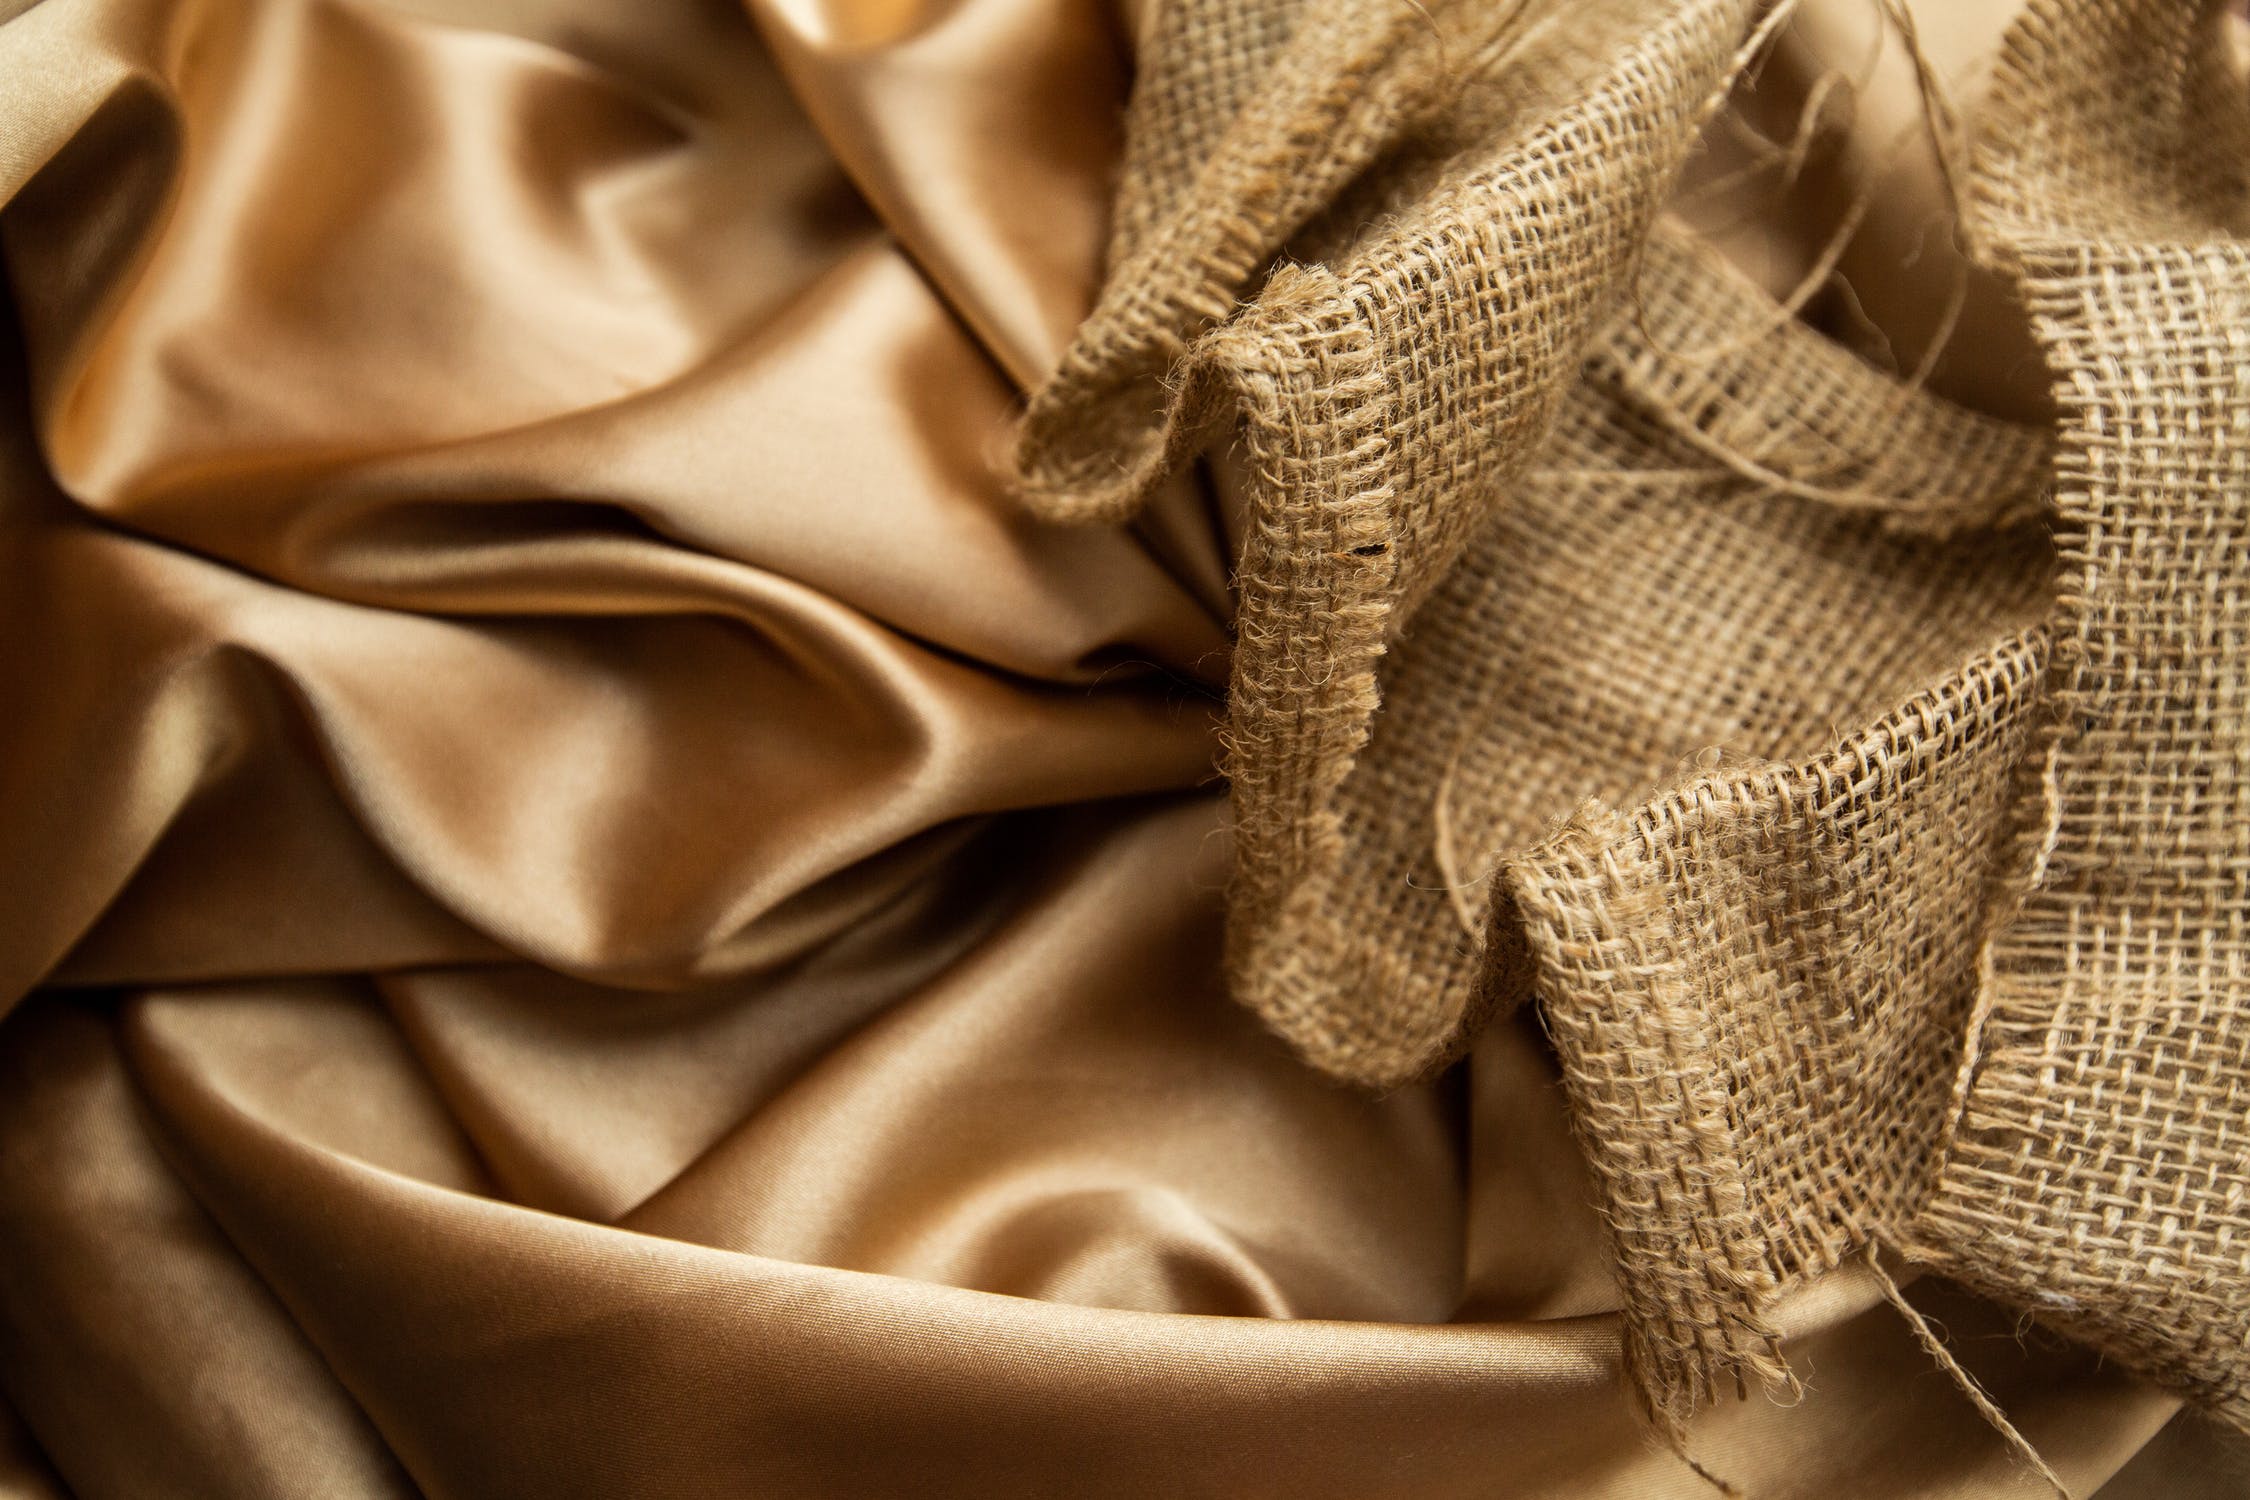 Rayon Fabric Sustainable: Everything You Need to Know About It 